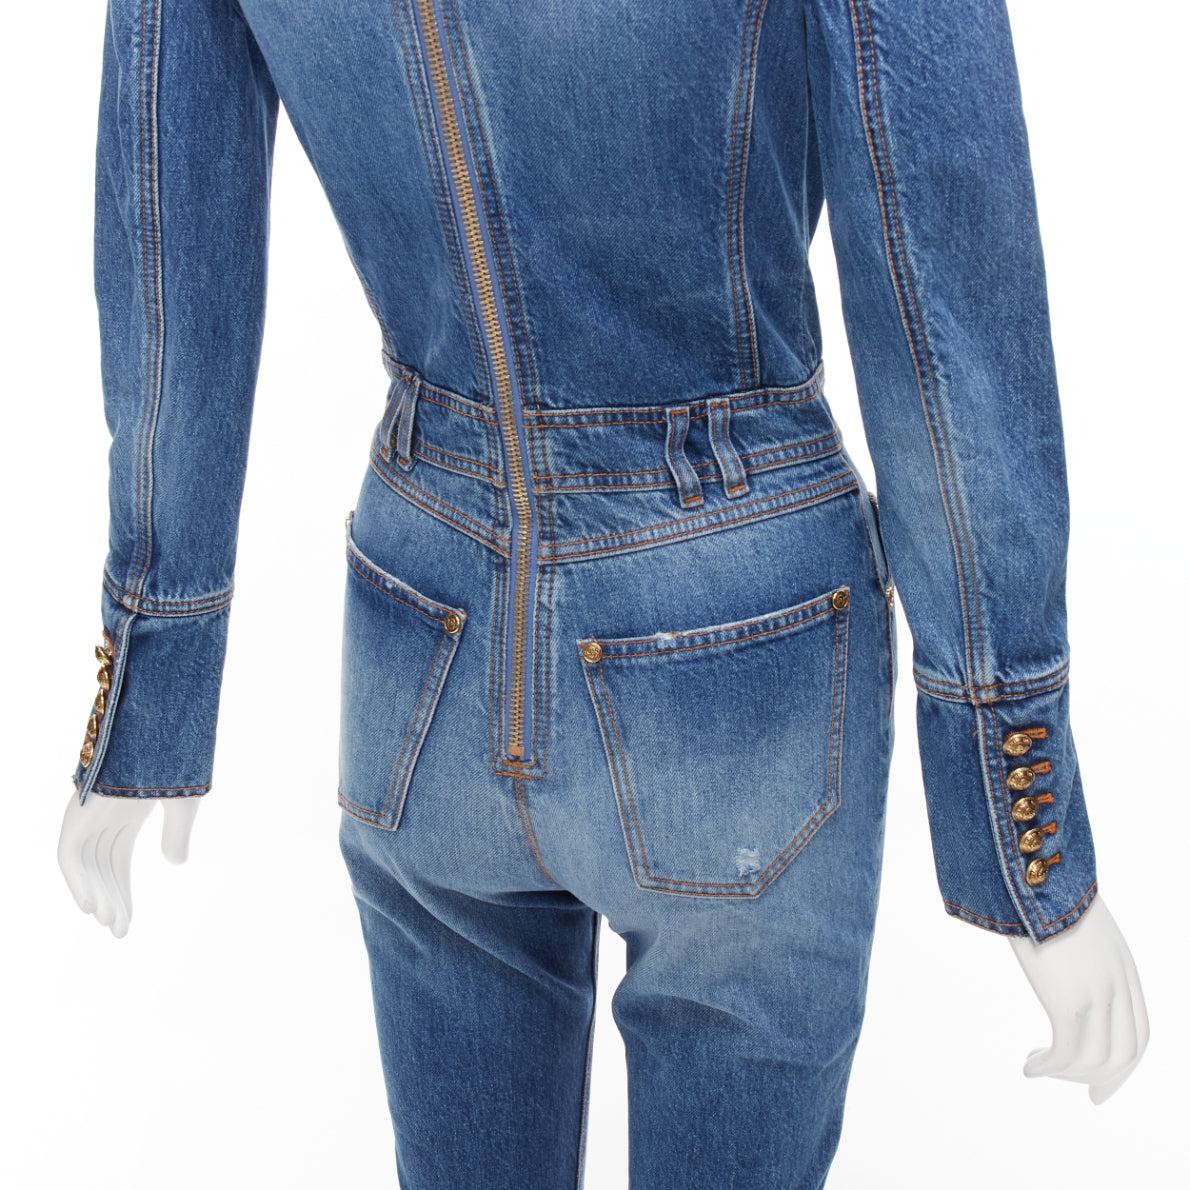 BALMAIN blue washed distressed denim gold double breasted jumpsuit FR34 XS
Reference: AAWC/A00727
Brand: Balmain
Designer: Olivier Rousteing
Collection: 2020
Material: Denim
Color: Blue, Gold
Pattern: Solid
Closure: Zip
Extra Details: Long sleeve